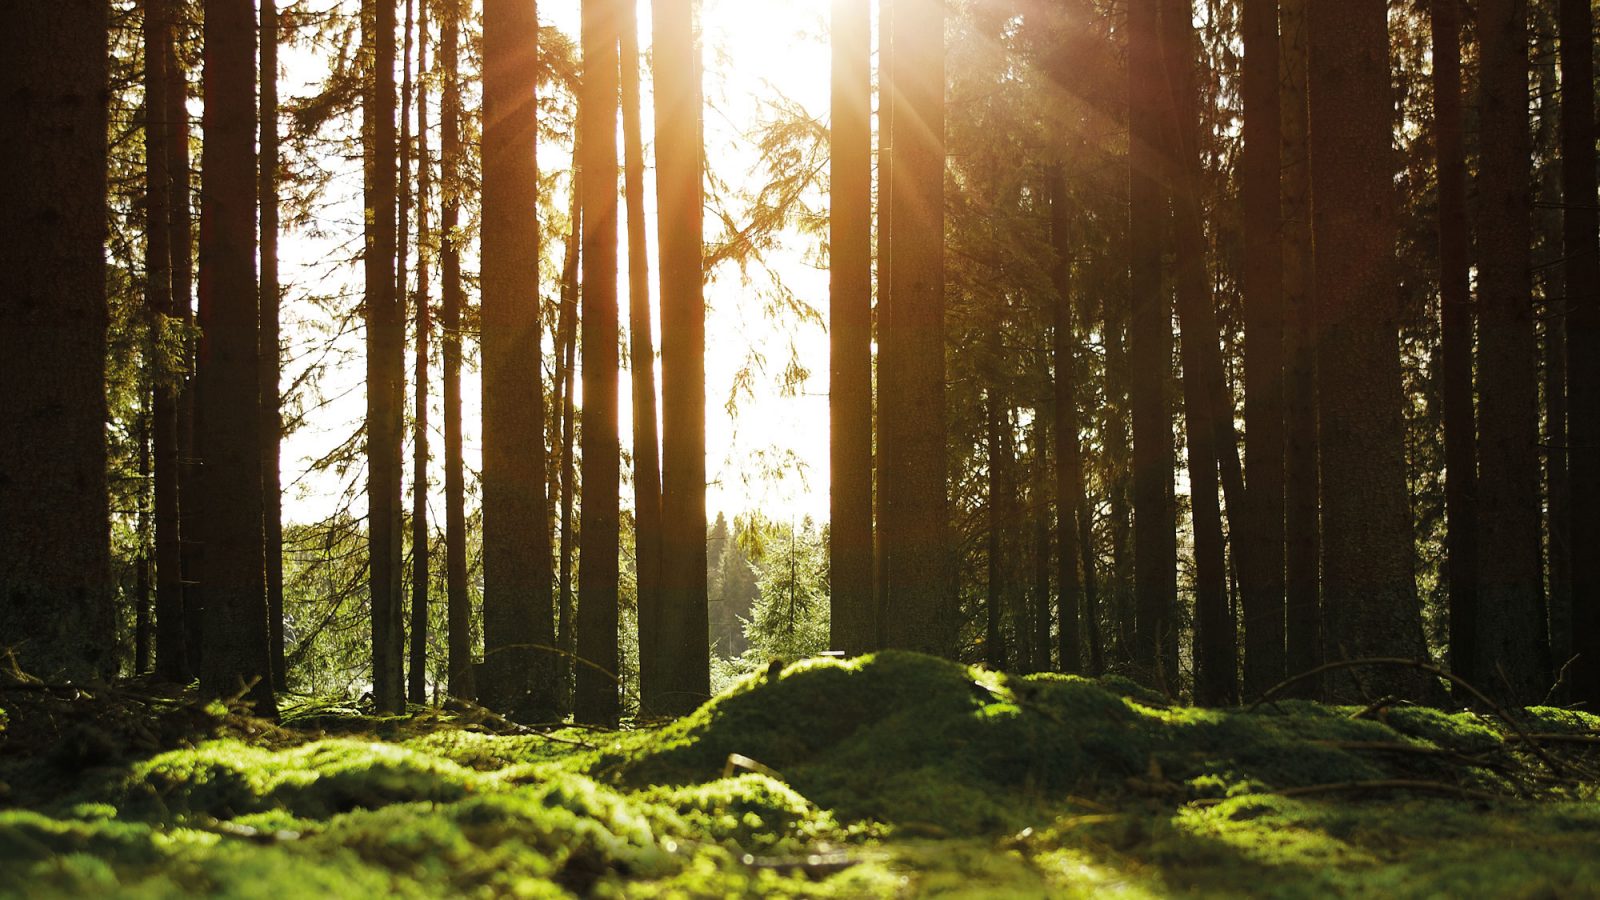 The sun shines through tall pines, the ground covered with moss.